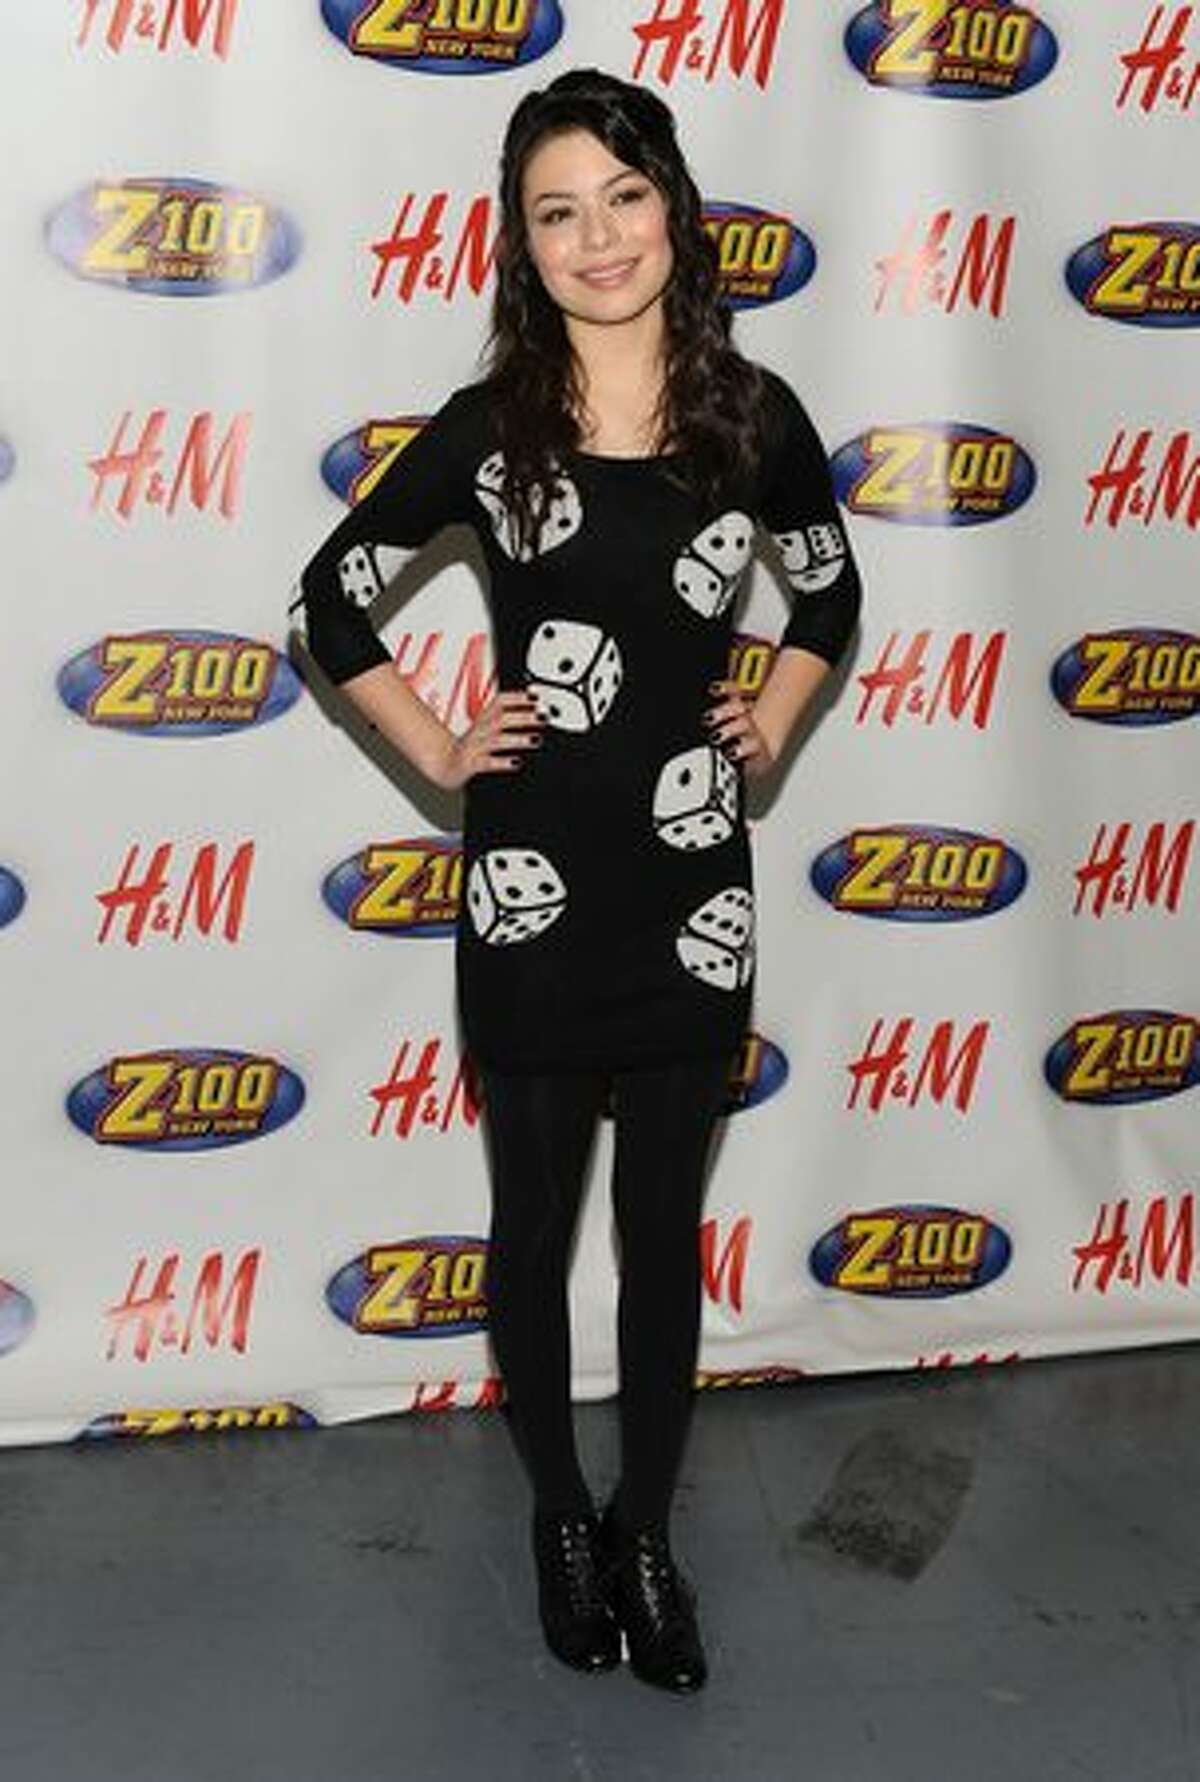 Actress Miranda Cosgrove attends Z100's Jingle Ball 2009 at Madison Square Garden on December 11, 2009 in New York City.